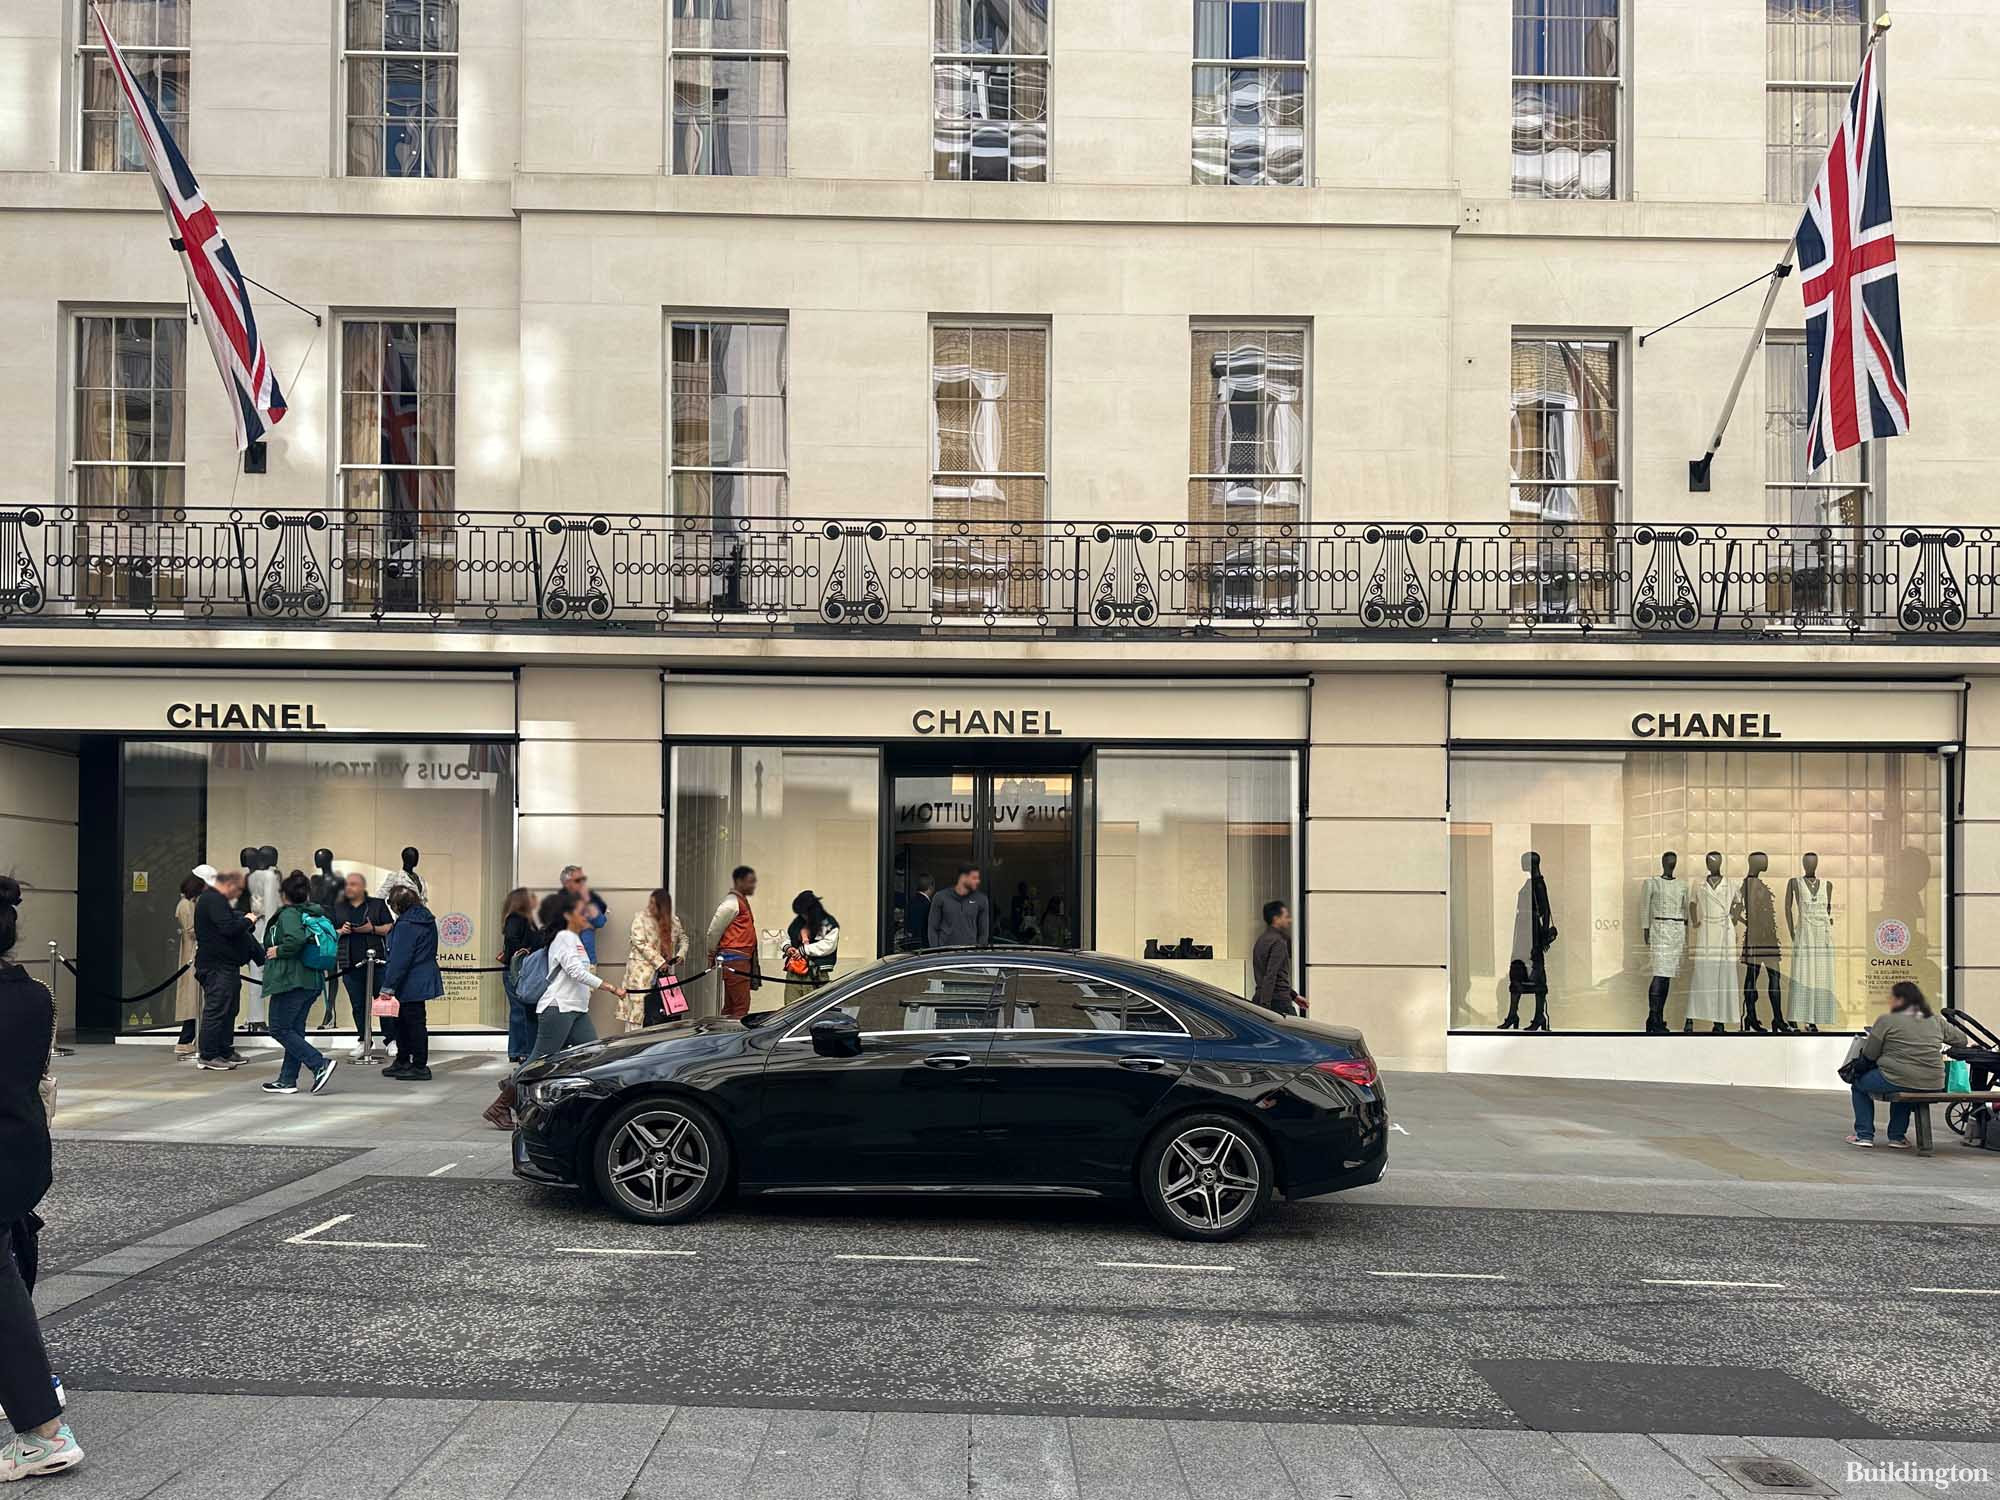 Queue at Chanel London store at 158-159 New Bond Street in Mayfair, London W1.